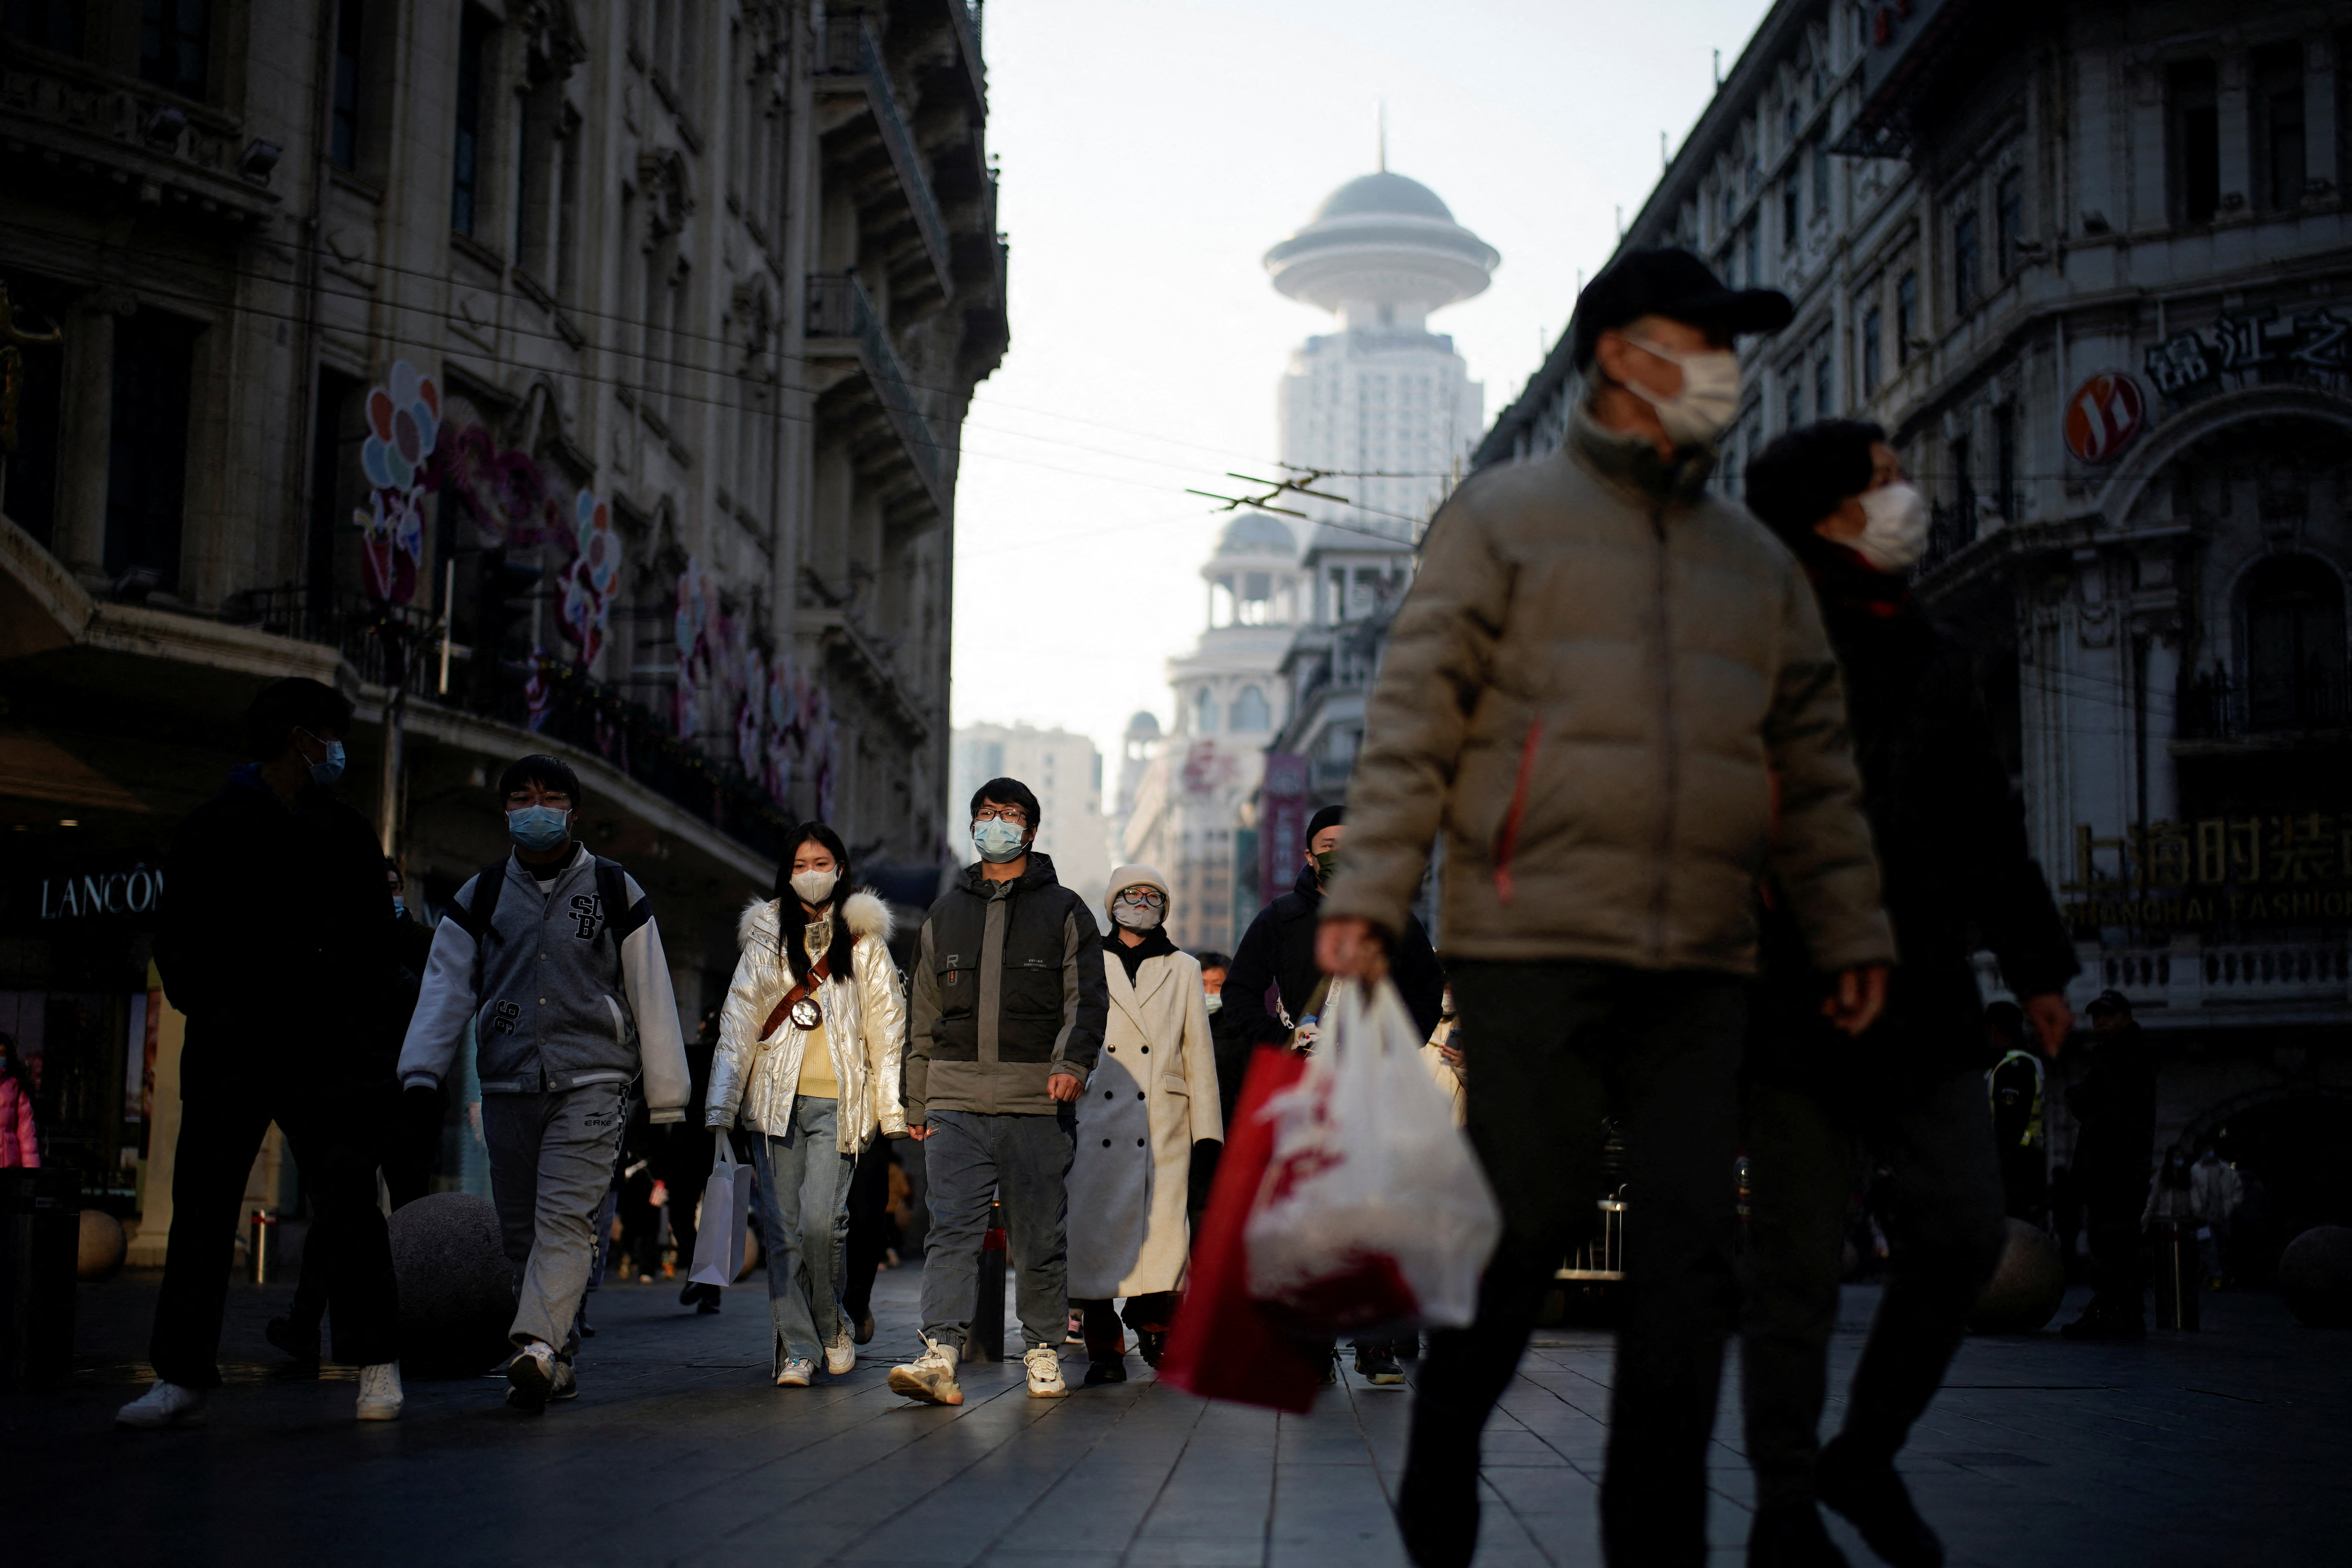 People wearing protective face masks walk on a street, following new cases of the coronavirus disease (COVID-19), in Shanghai, China, December 30, 2021. REUTERS/Aly Song